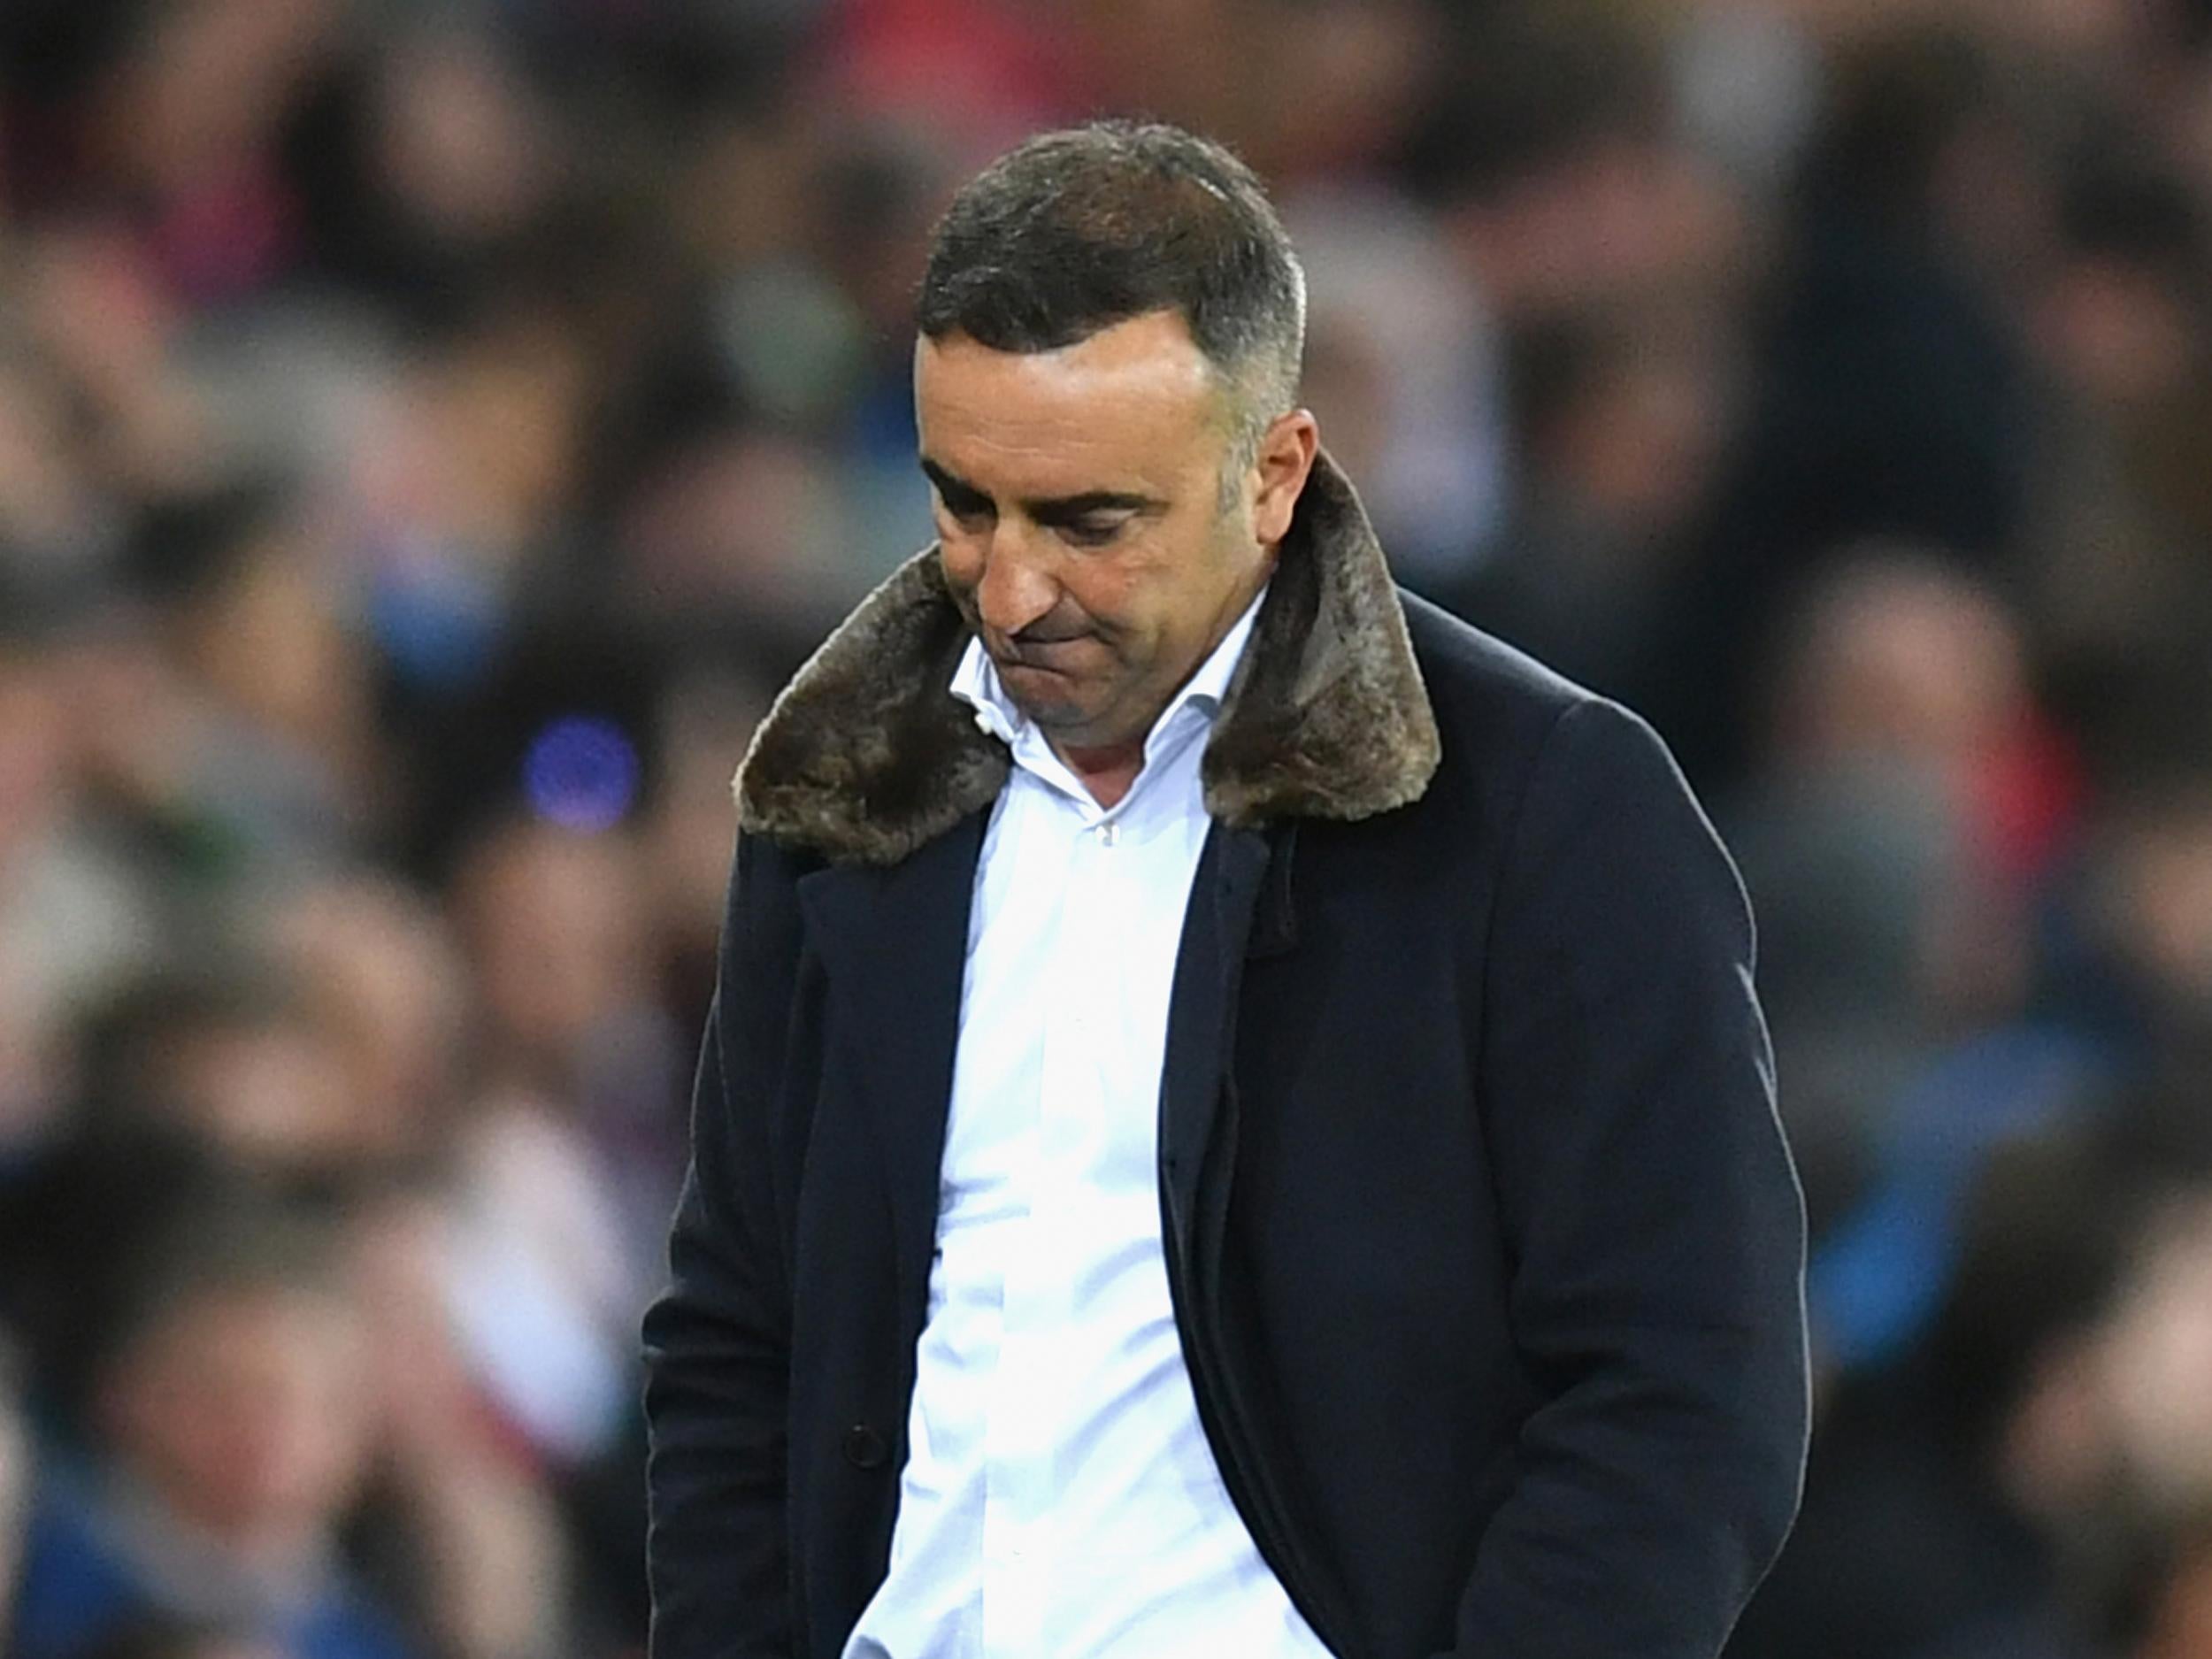 Carvalhal will not see his contract renewed